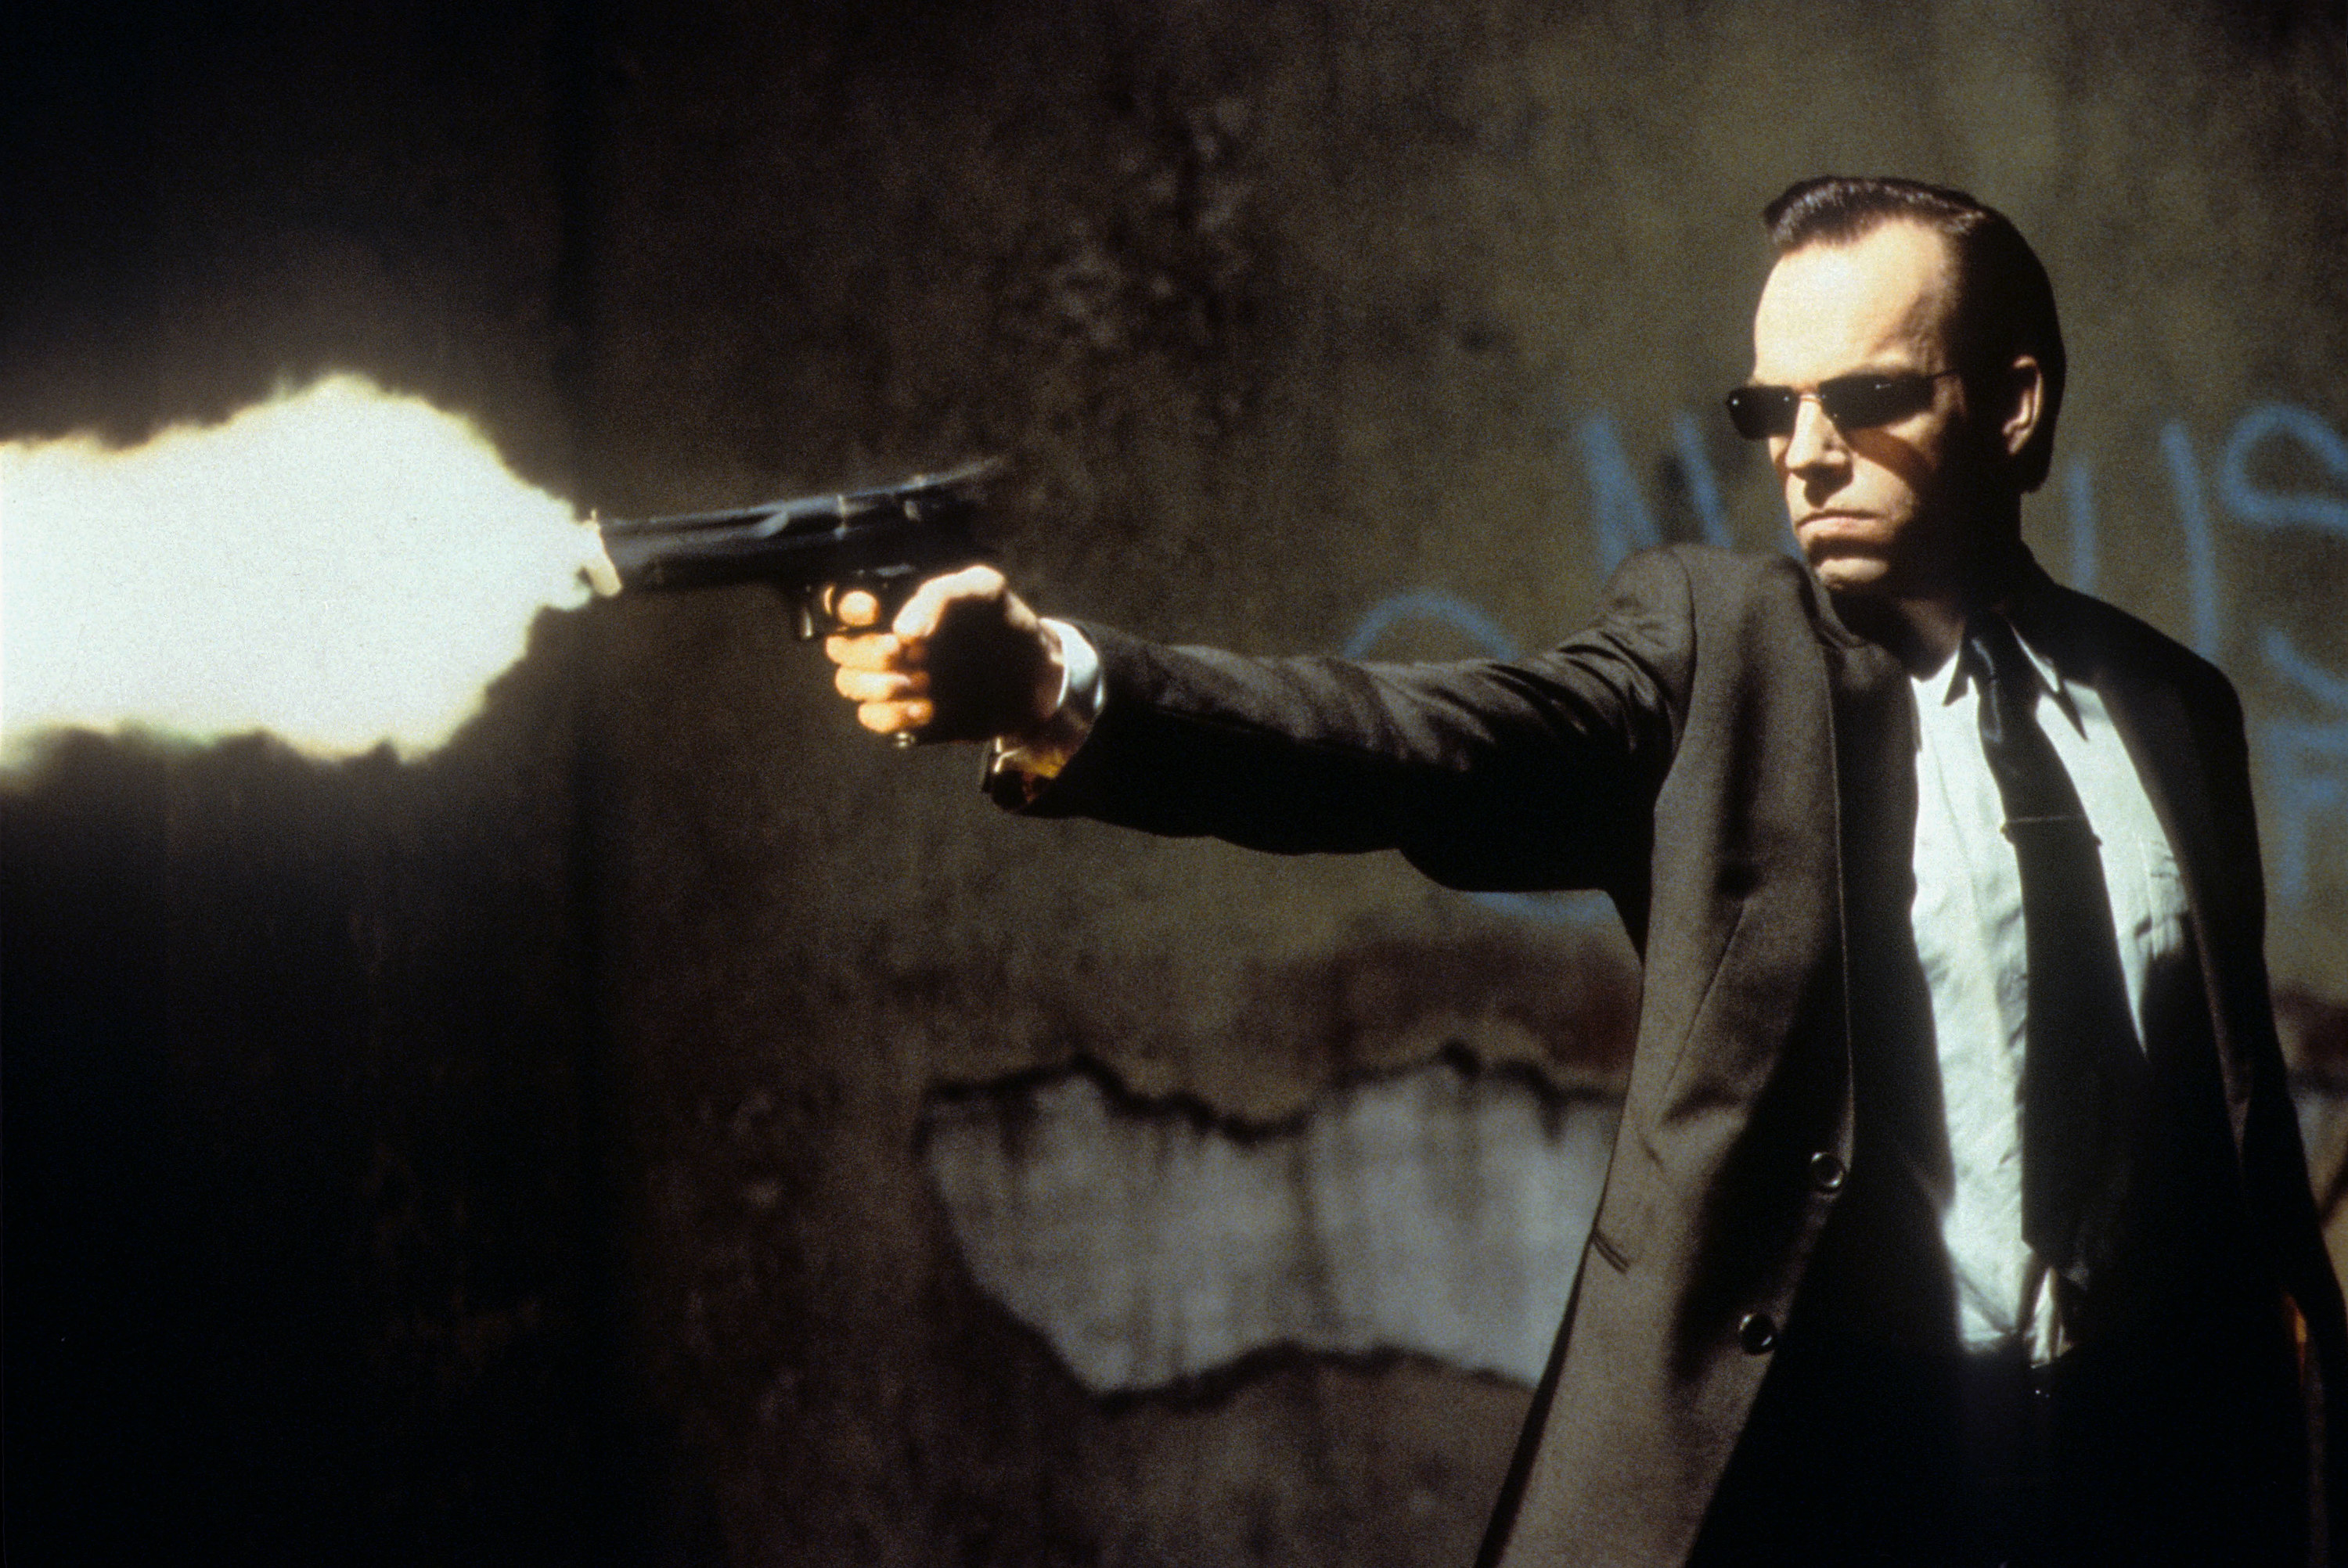 Agent Smith shooting a gun, wearing his usual suit and sunglasses